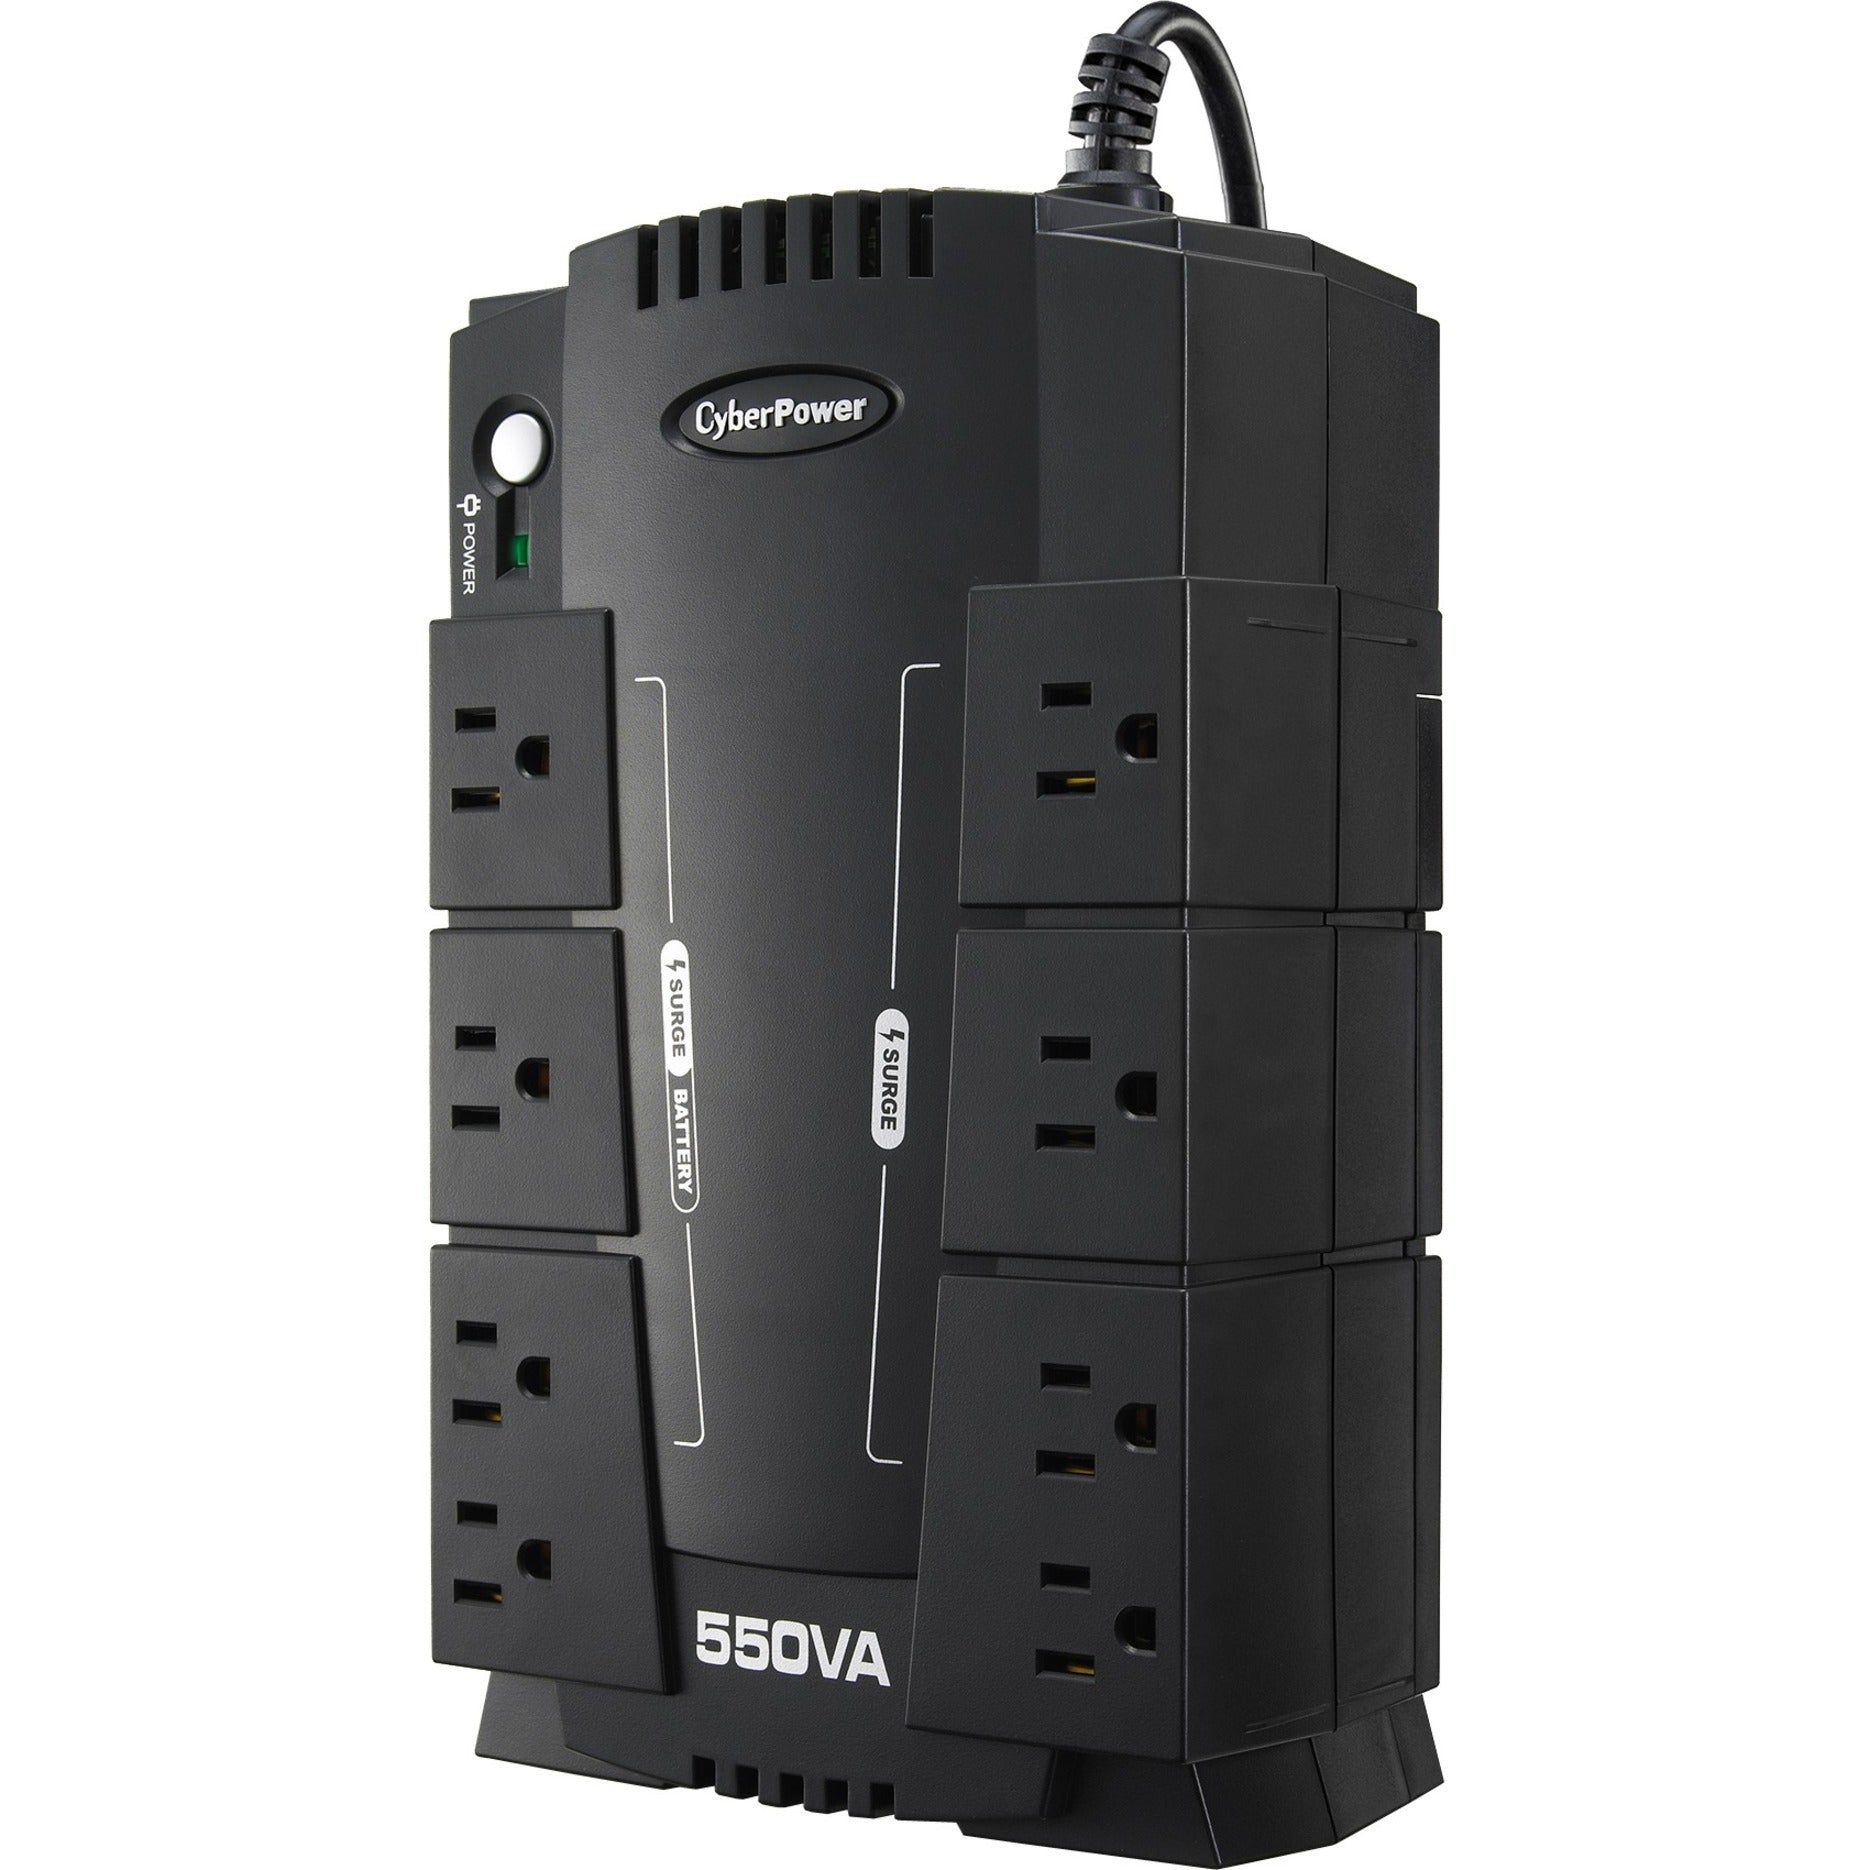 CyberPower CP550SLG Standby UPS 550 VA Desktop Power Backup 2 Minute Full Load Backup Energy Efficient